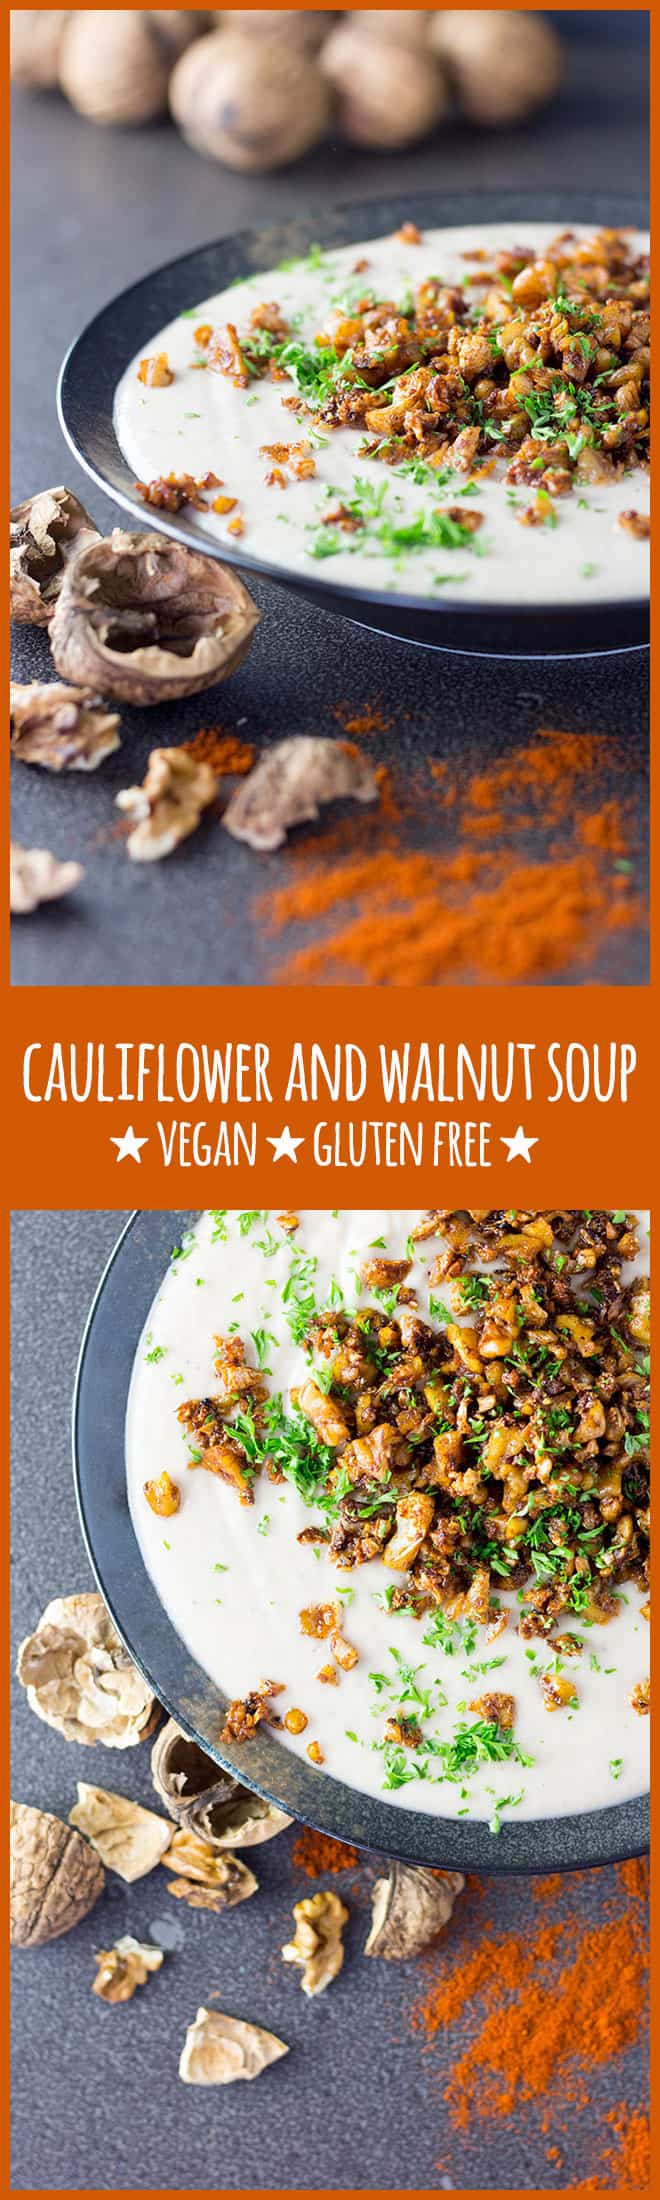 A satisfyingly creamy and earthy cauliflower and walnut soup topped with smoky, crispy crumbs.